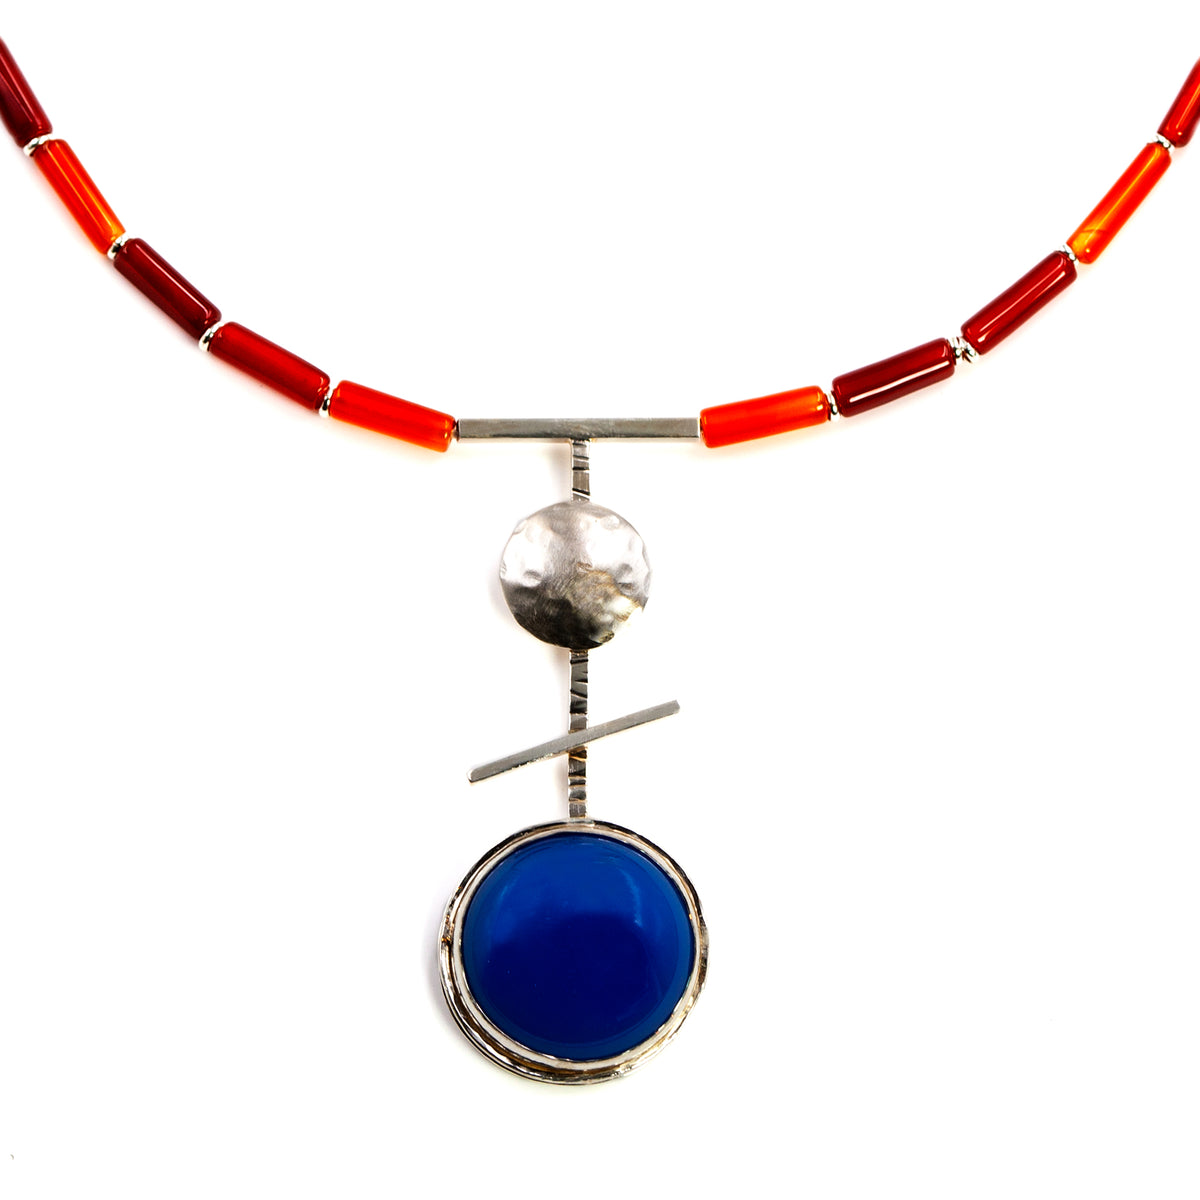 Orb necklace with blue agate by Rouaida.